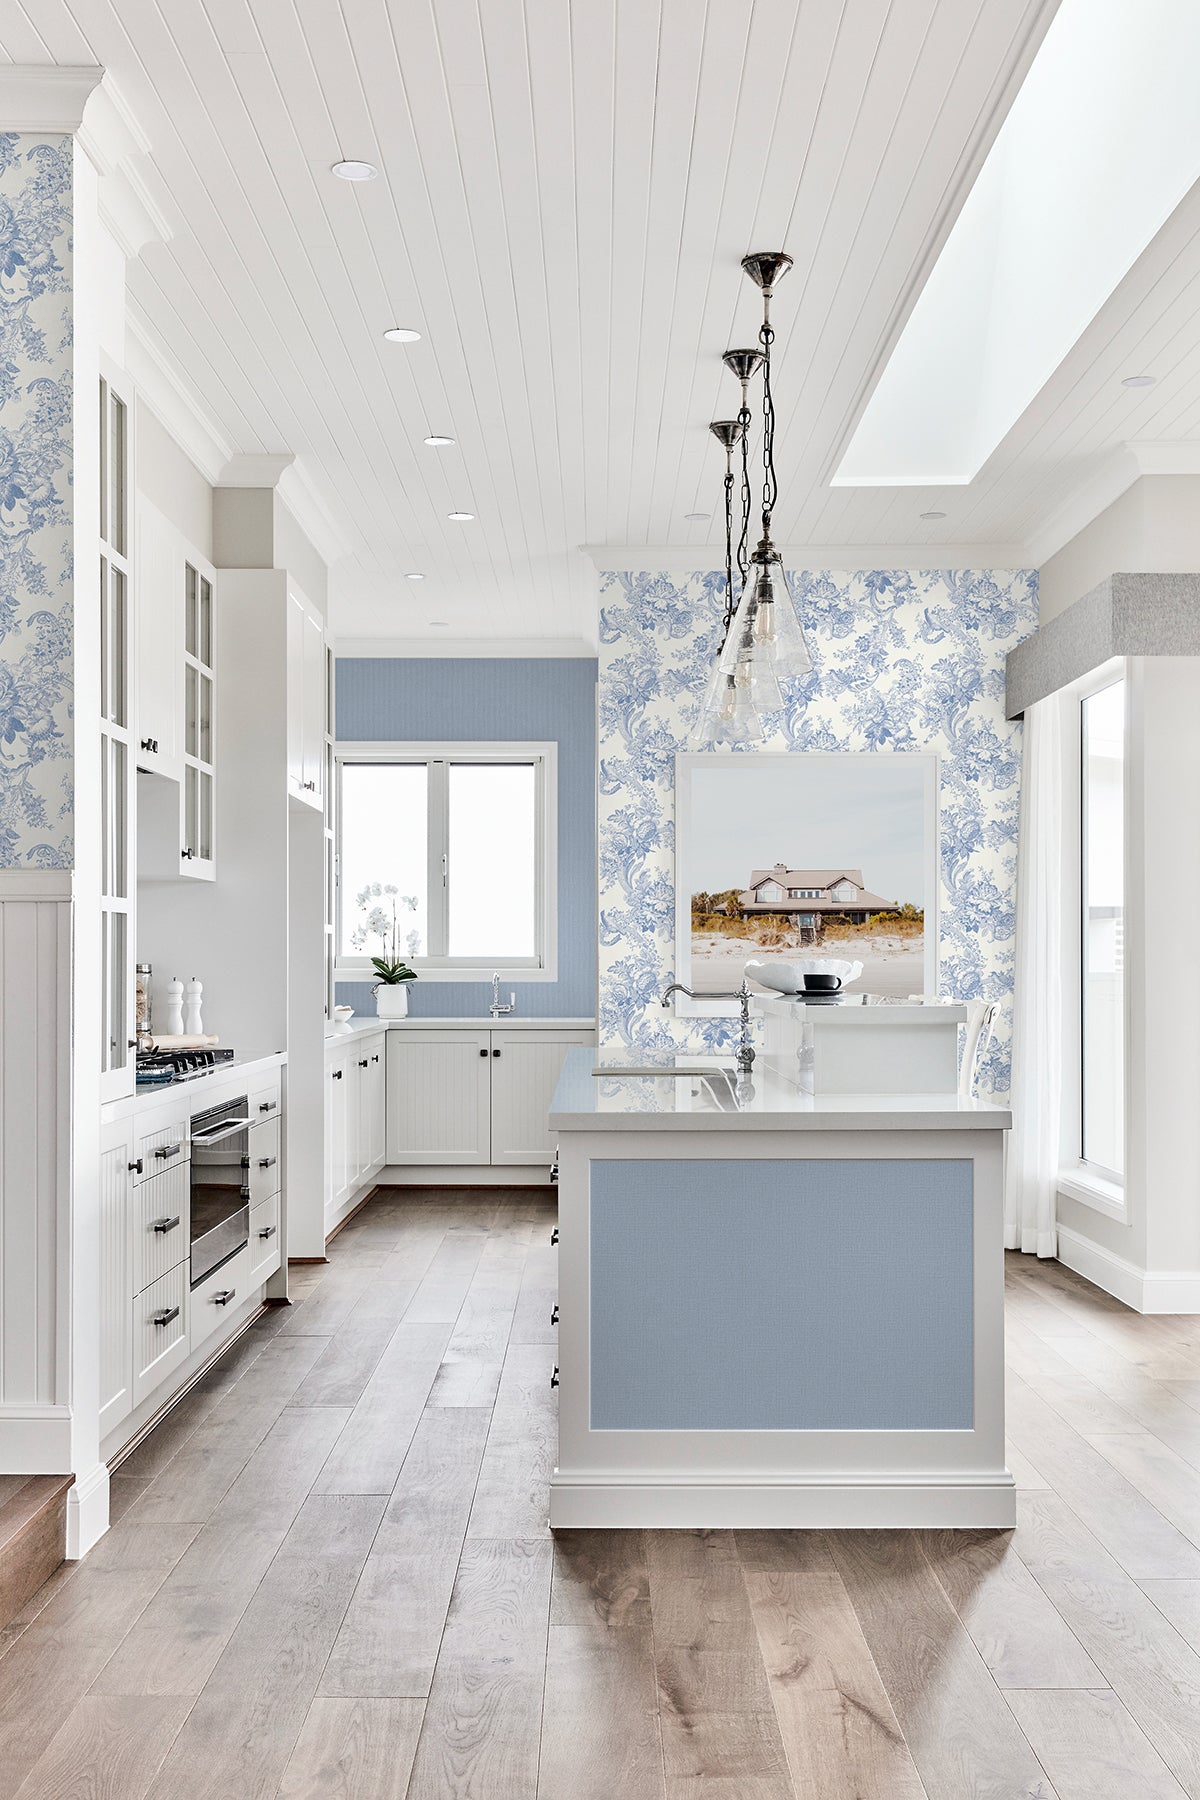 Select 2927-81002 Newport Marblehead Bluebell Crosshatched Grasscloth Bluebell A-Street Prints Wallpaper